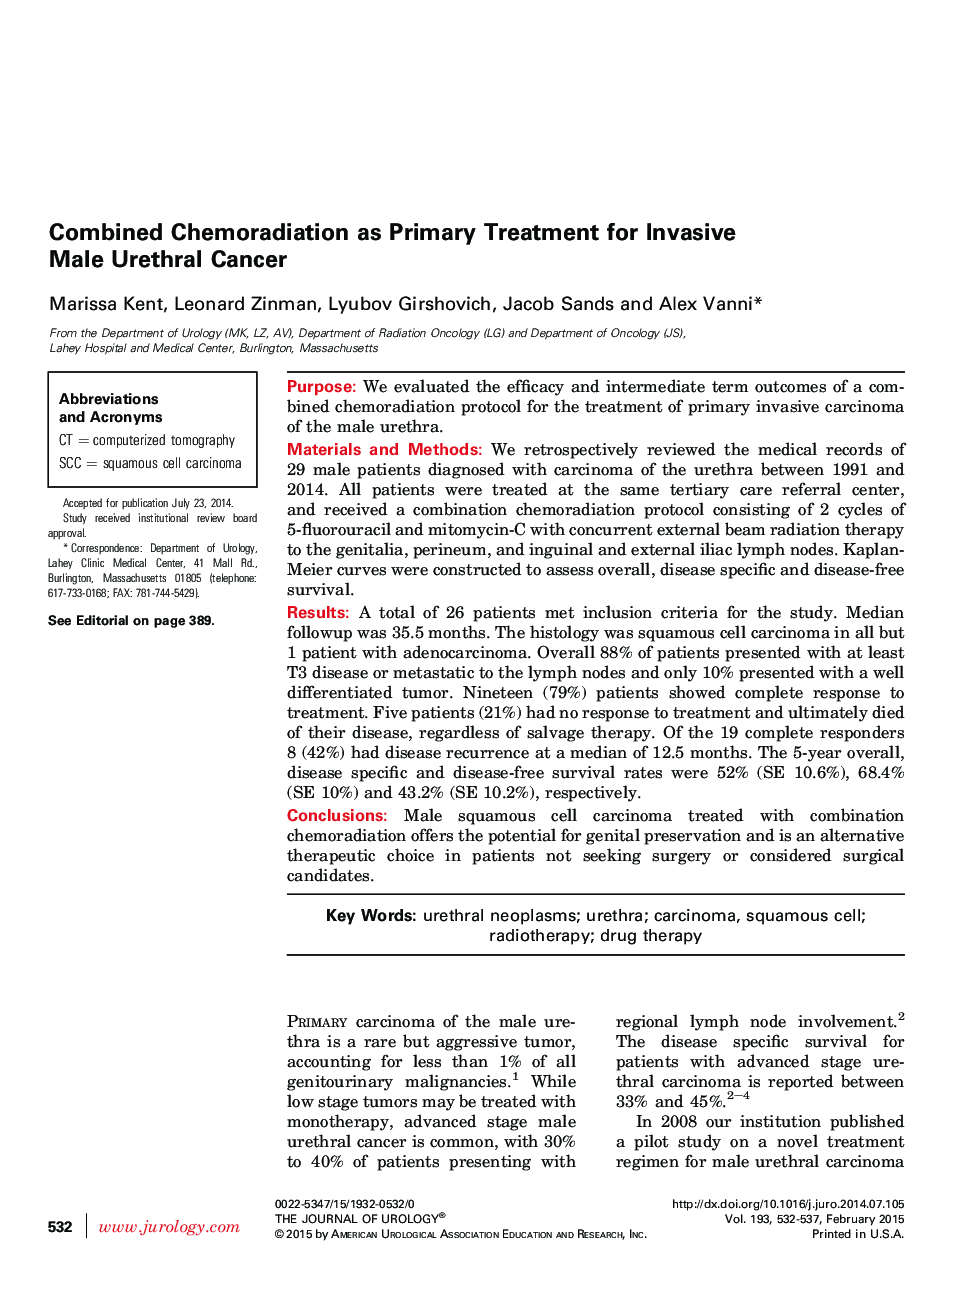 Combined Chemoradiation as Primary Treatment for Invasive Male Urethral Cancer 